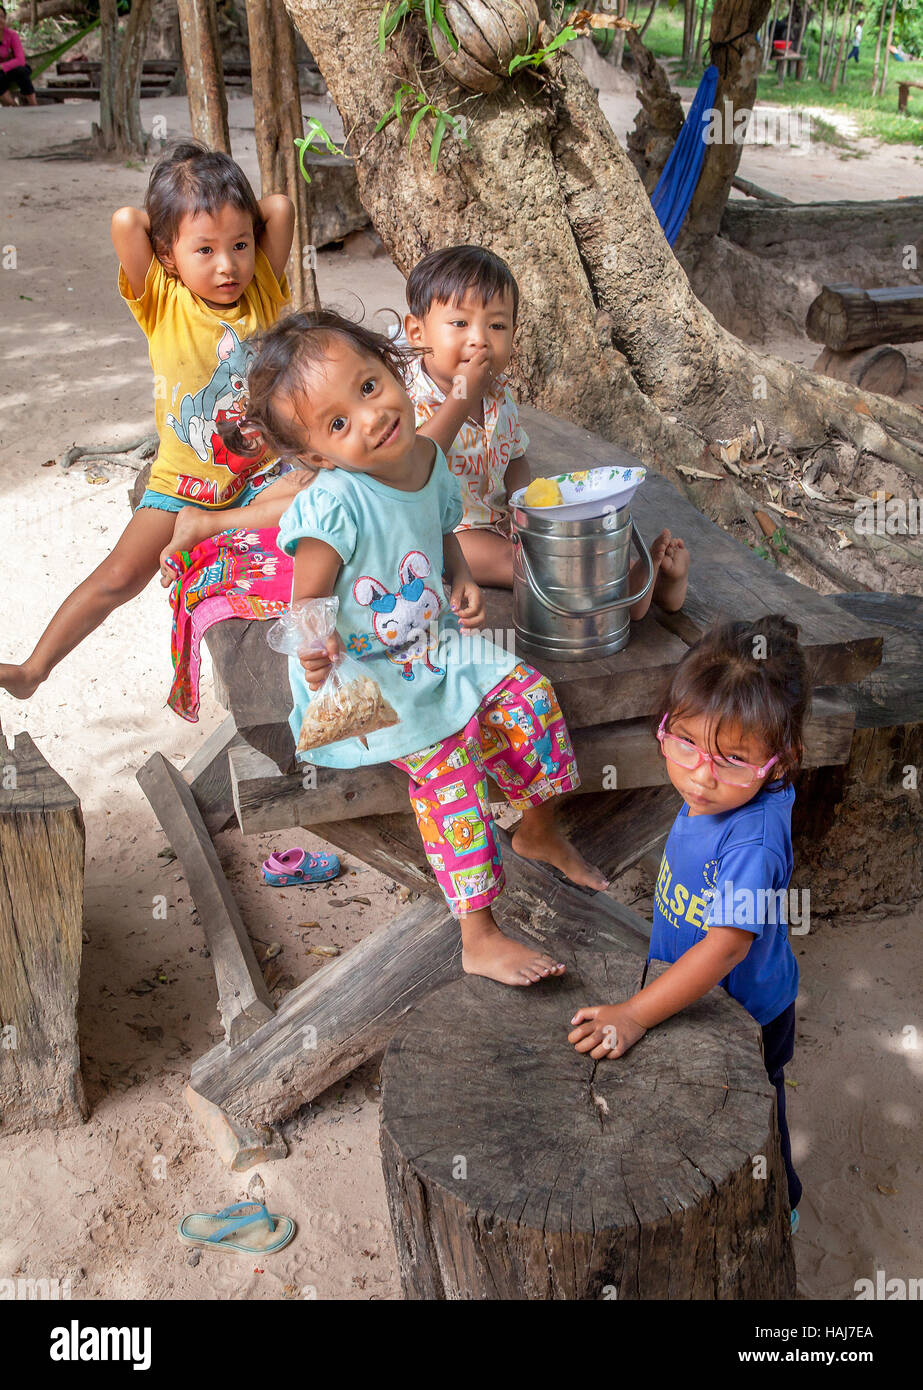 Four happy Cambodian children share a snack together in Banteay Srei near Siem Reap, Kingdom of Cambodia. Stock Photo